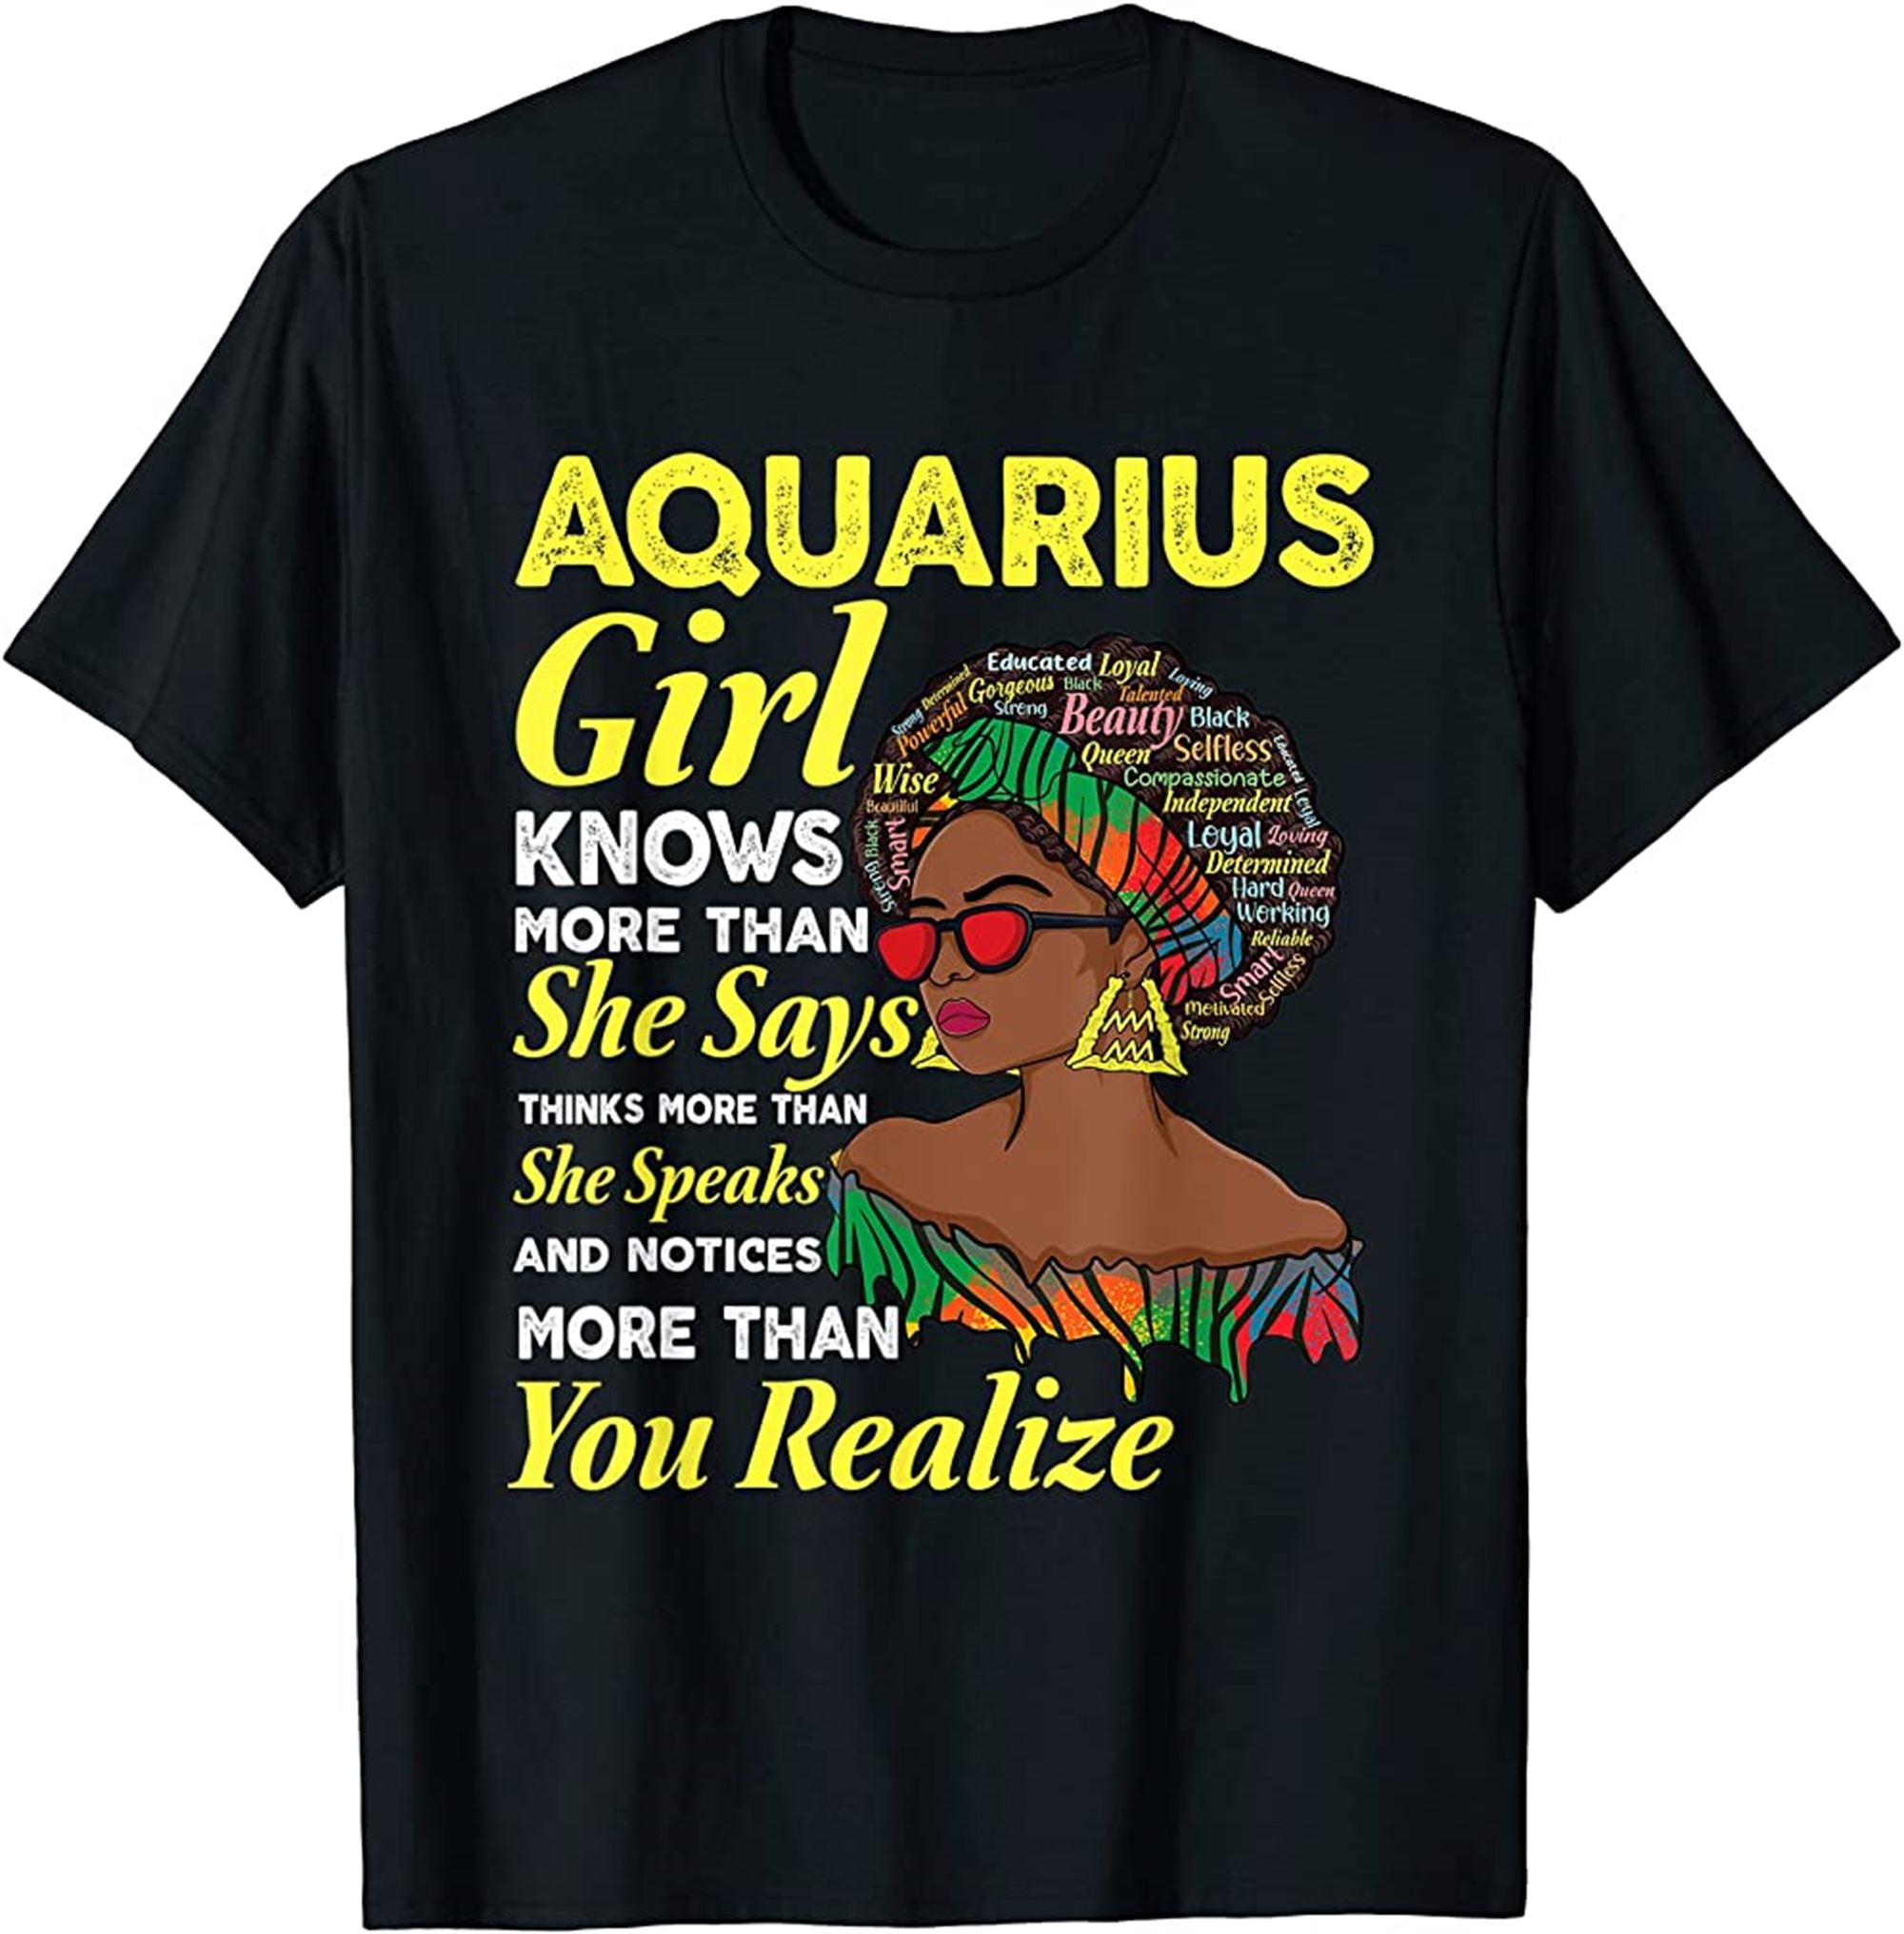 January And February Birthday Zodiac Sign Aquarius Queen T-shirt Full Size Up To 5xl